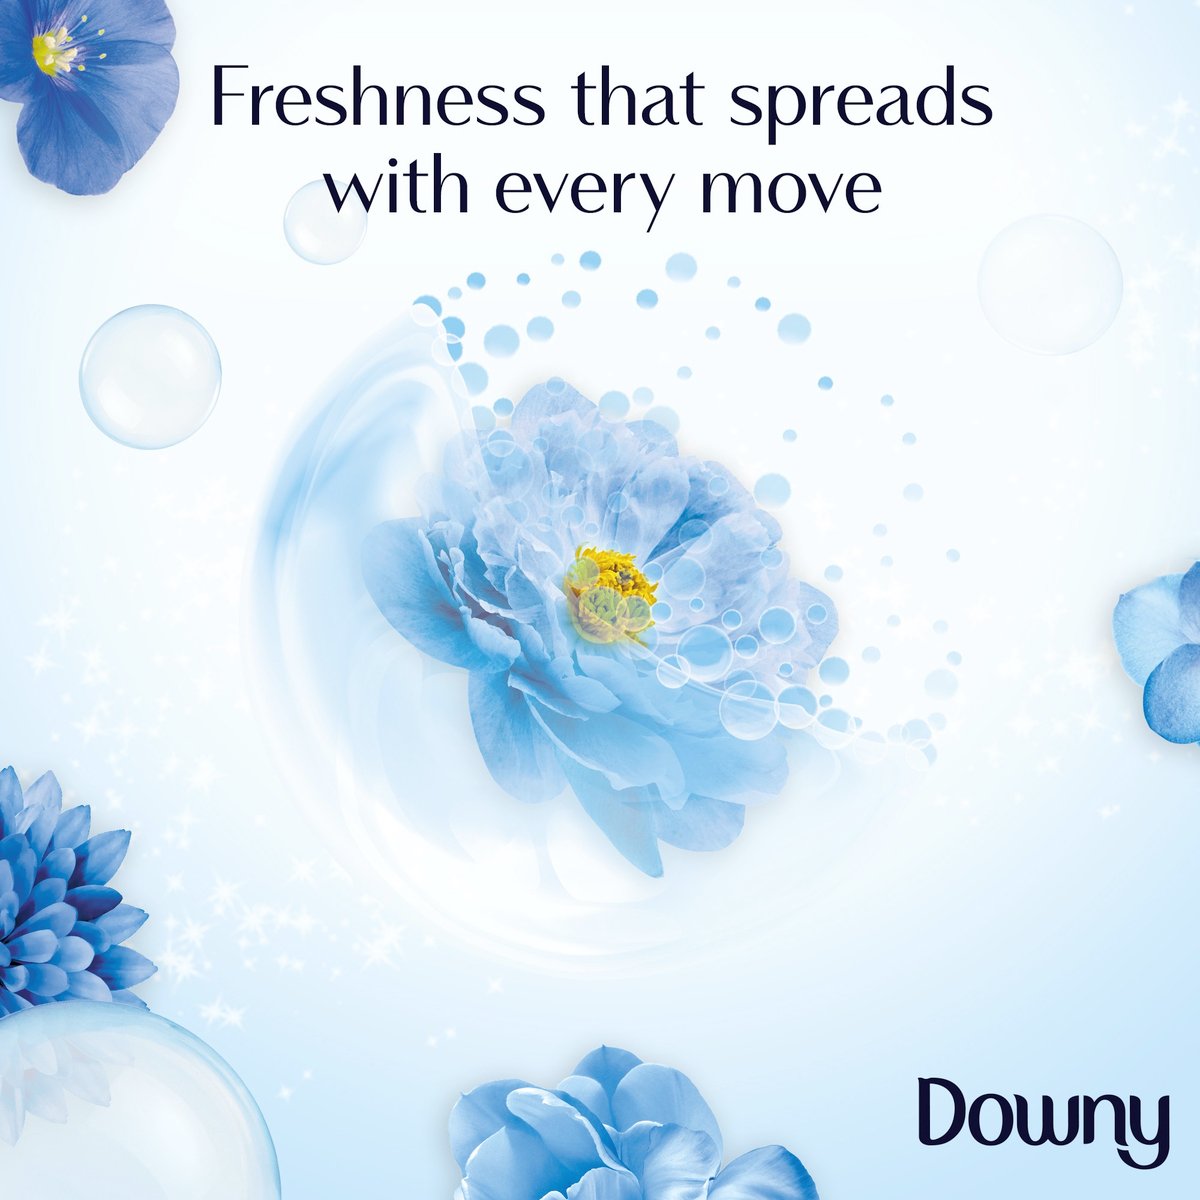 Downy Concentrate Fabric Softener Antibac 1.5Litre